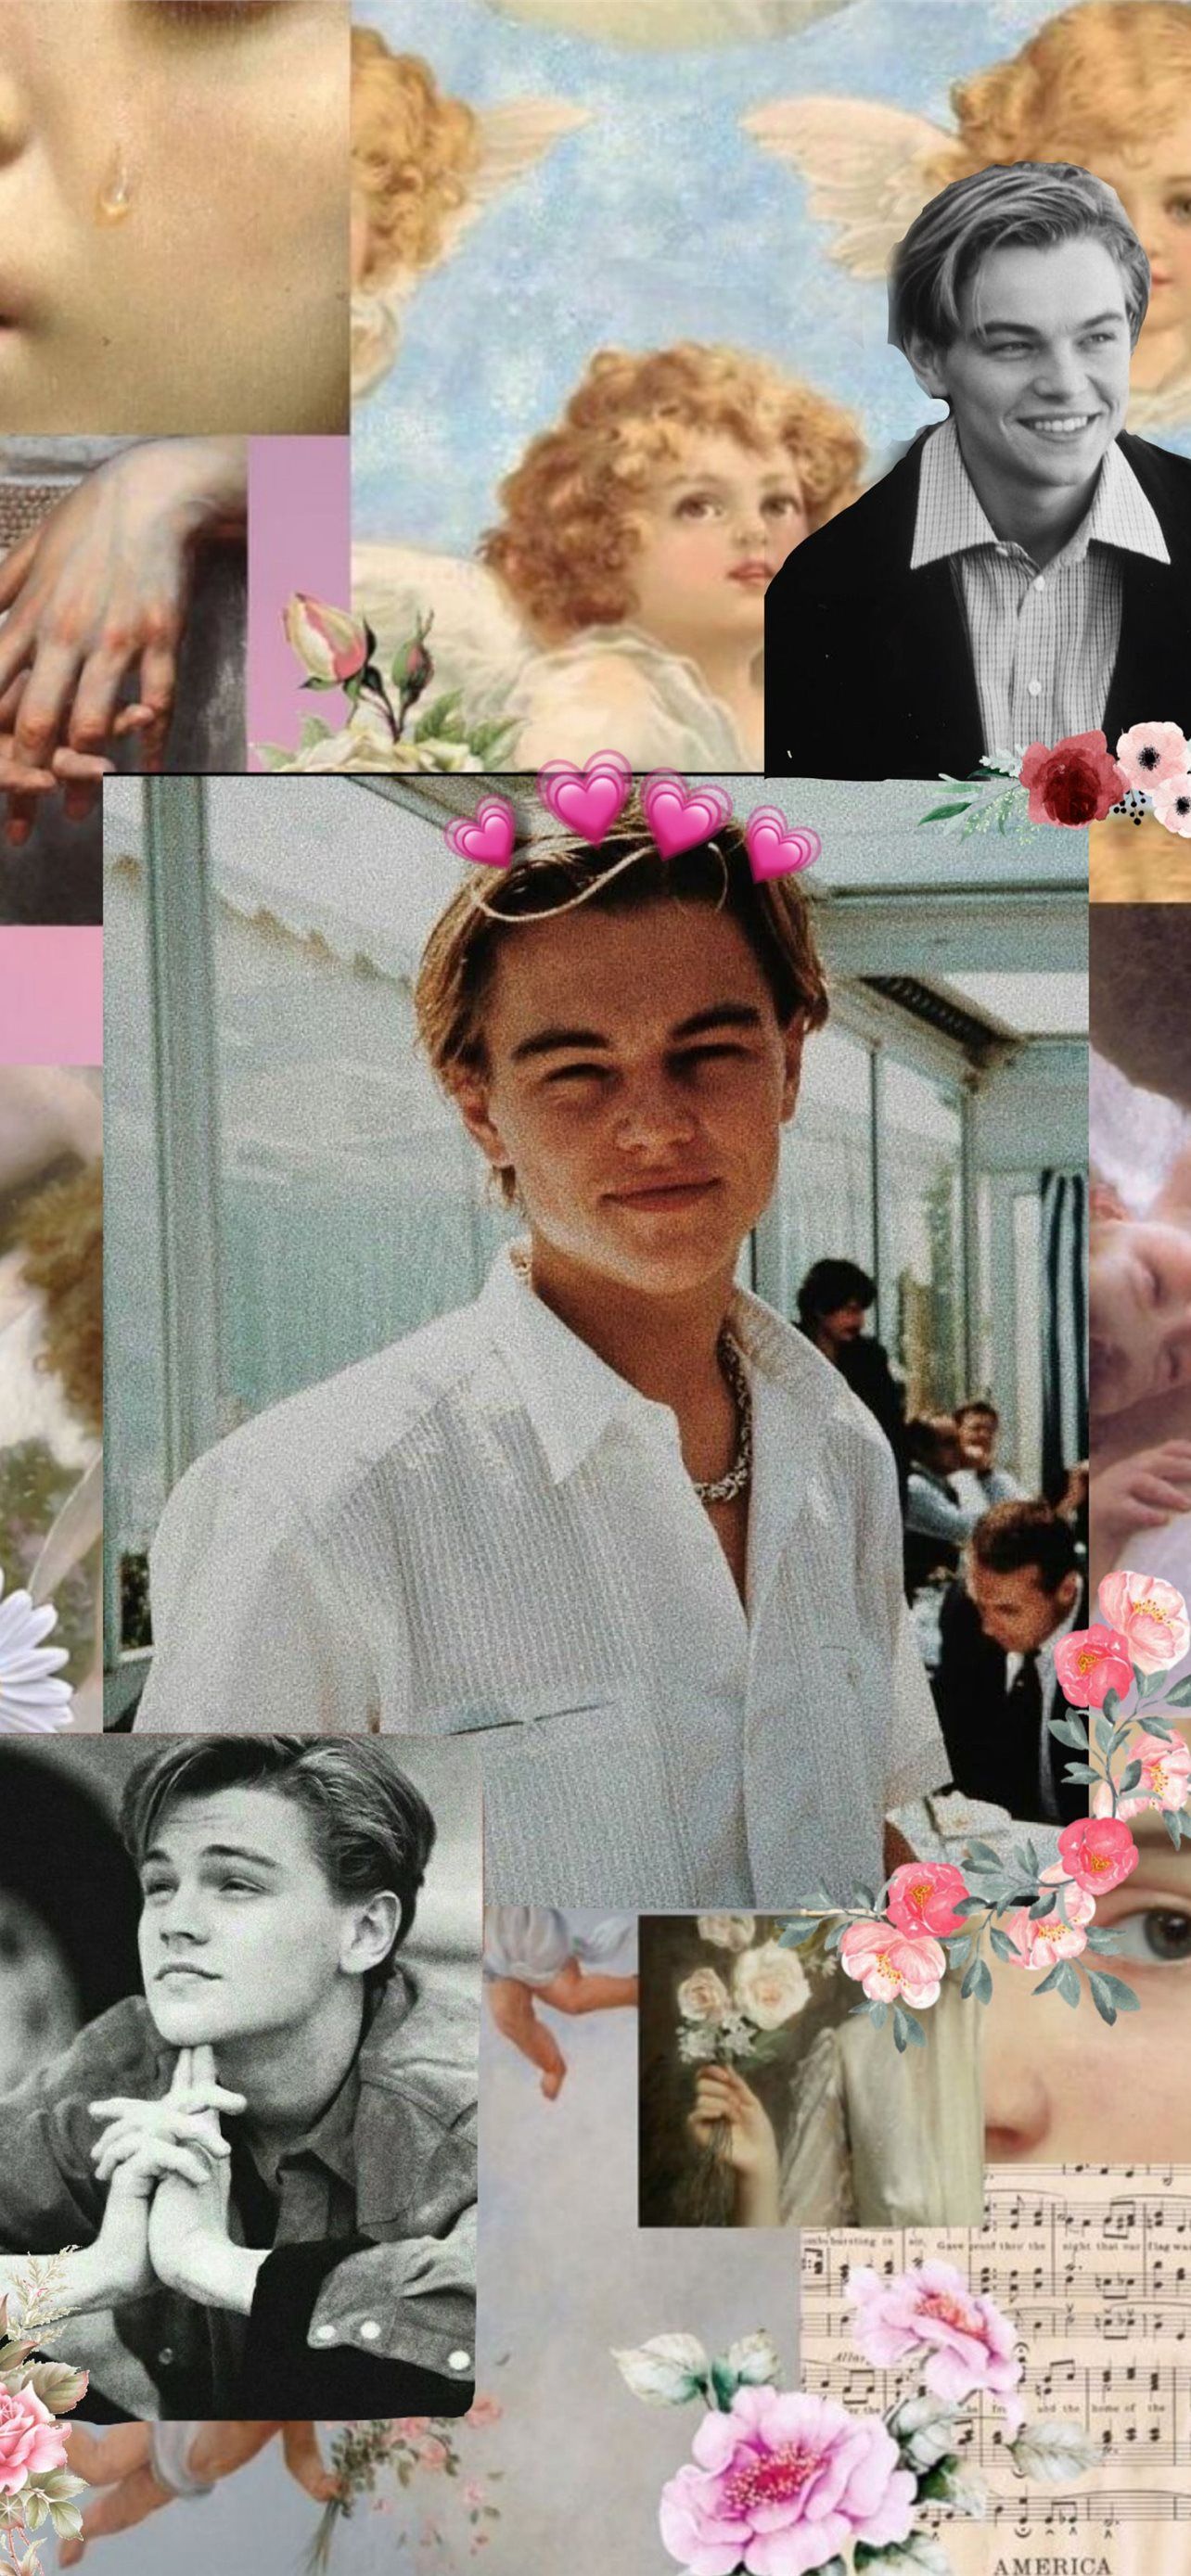 Leonardo DiCaprio wallpaper for phone with images of the actor from Titanic, The Aviator, and other movies - Leo